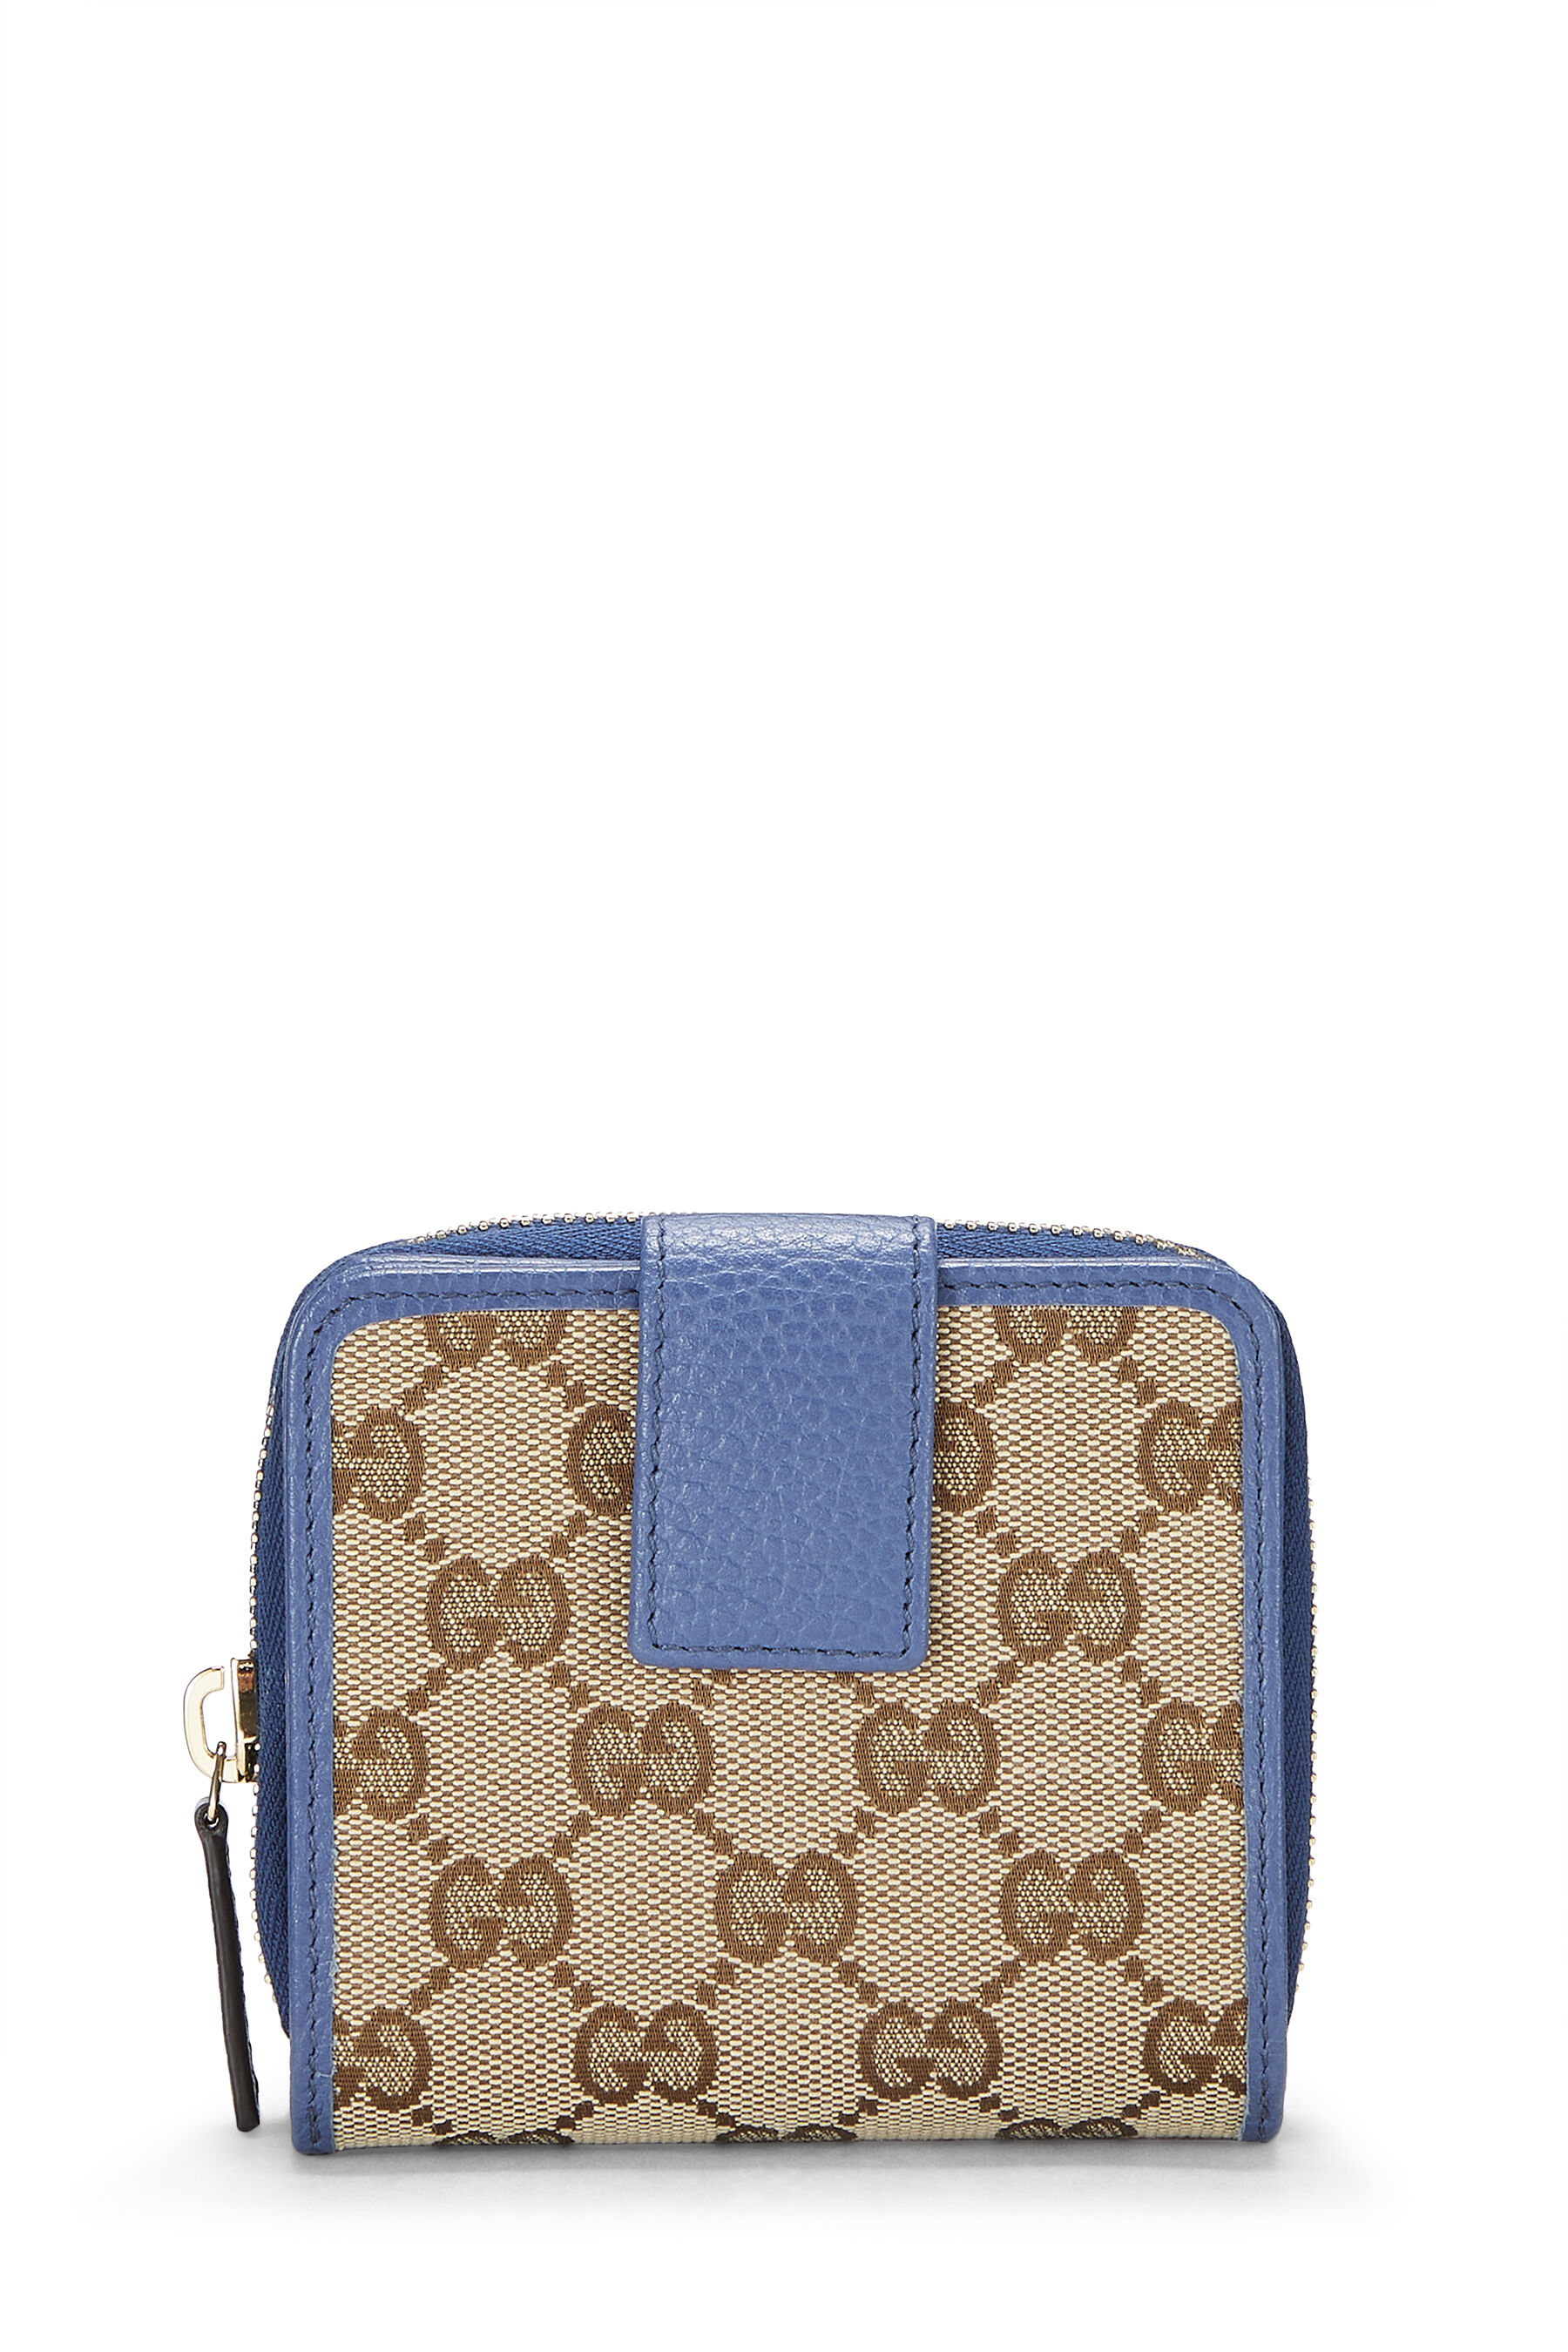 Pre-owned Gucci Blue Original 'gg' Canvas French Zip Around Wallet